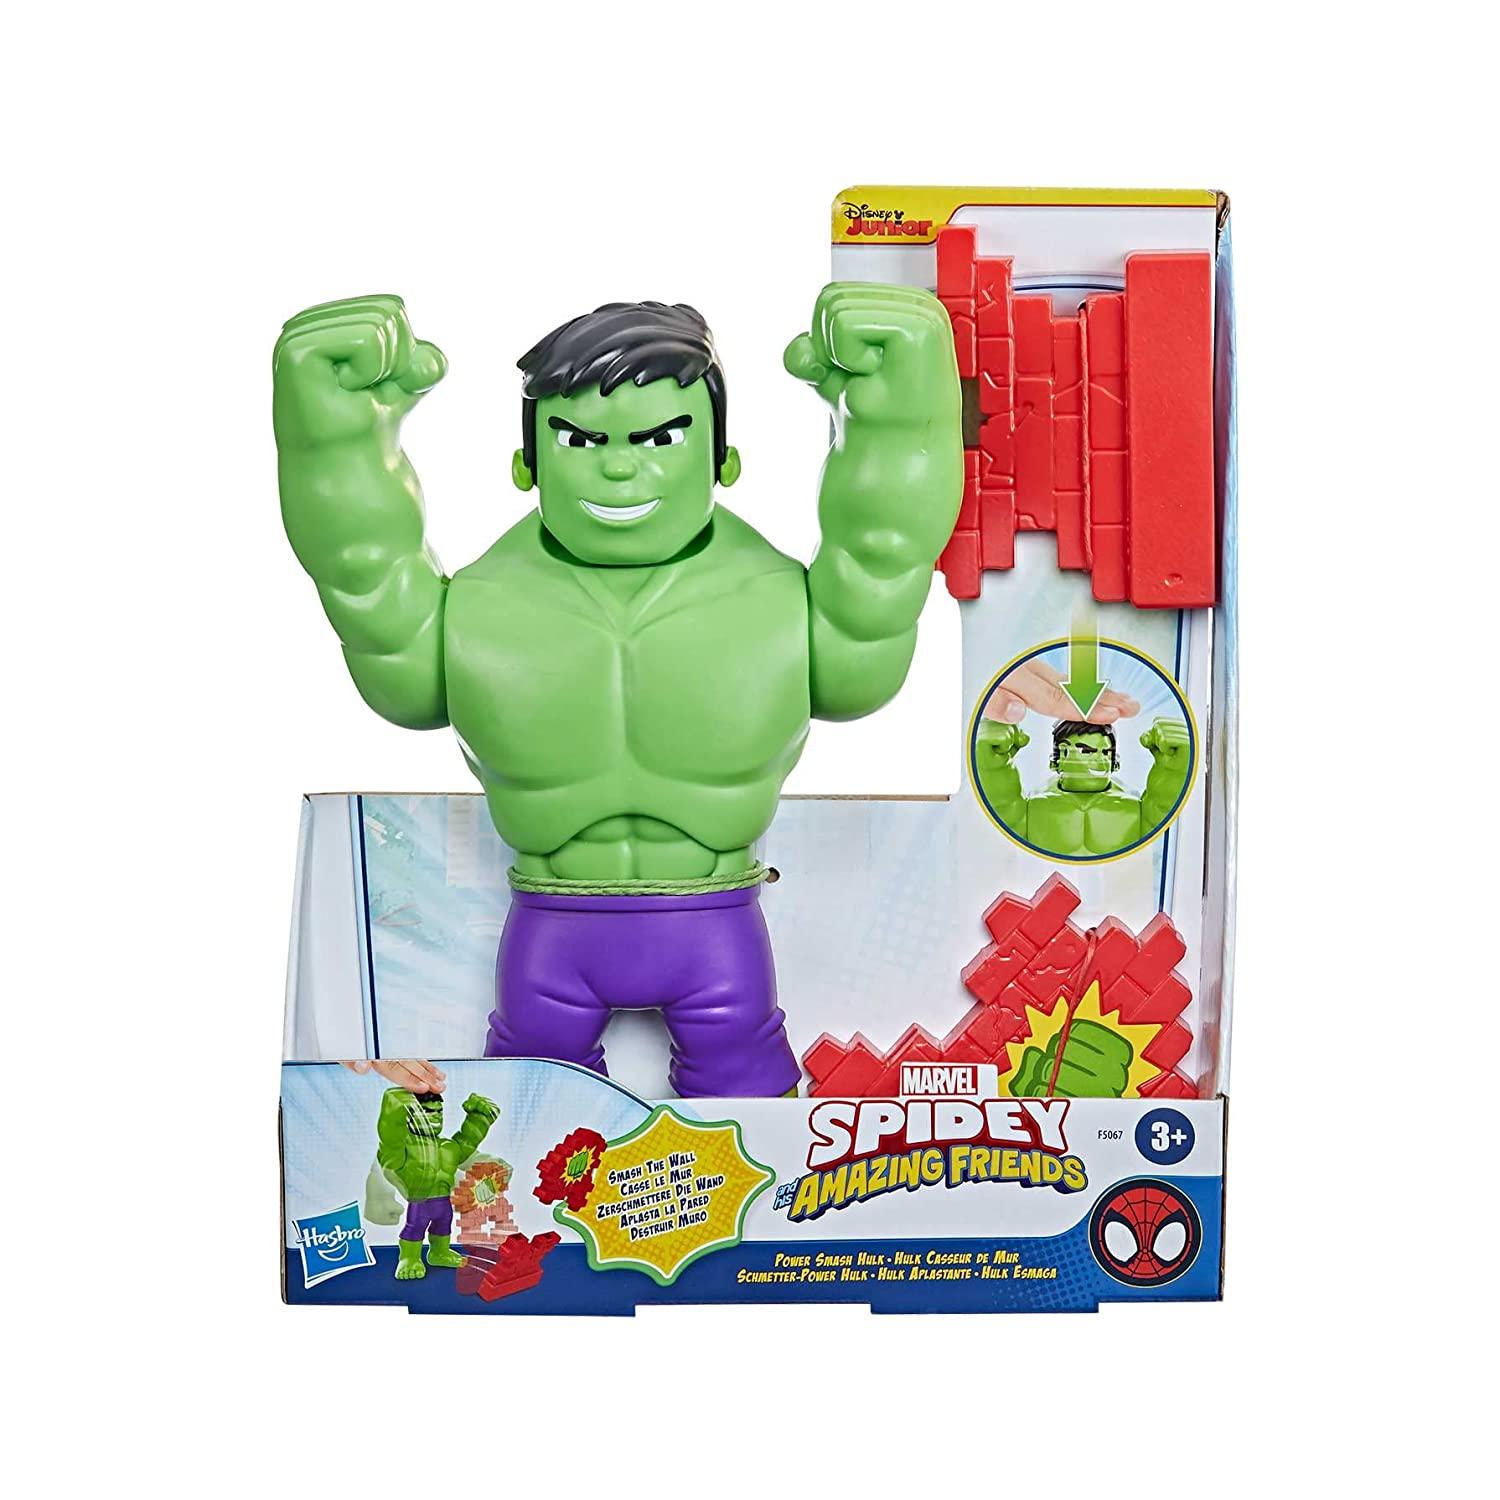 Marvel Spidey and His Amazing Friends Power Smash Hulk Face-Changing 10-inch Hulk Figure with Brick Wall Accessory Preschool Toy - FunCorp India